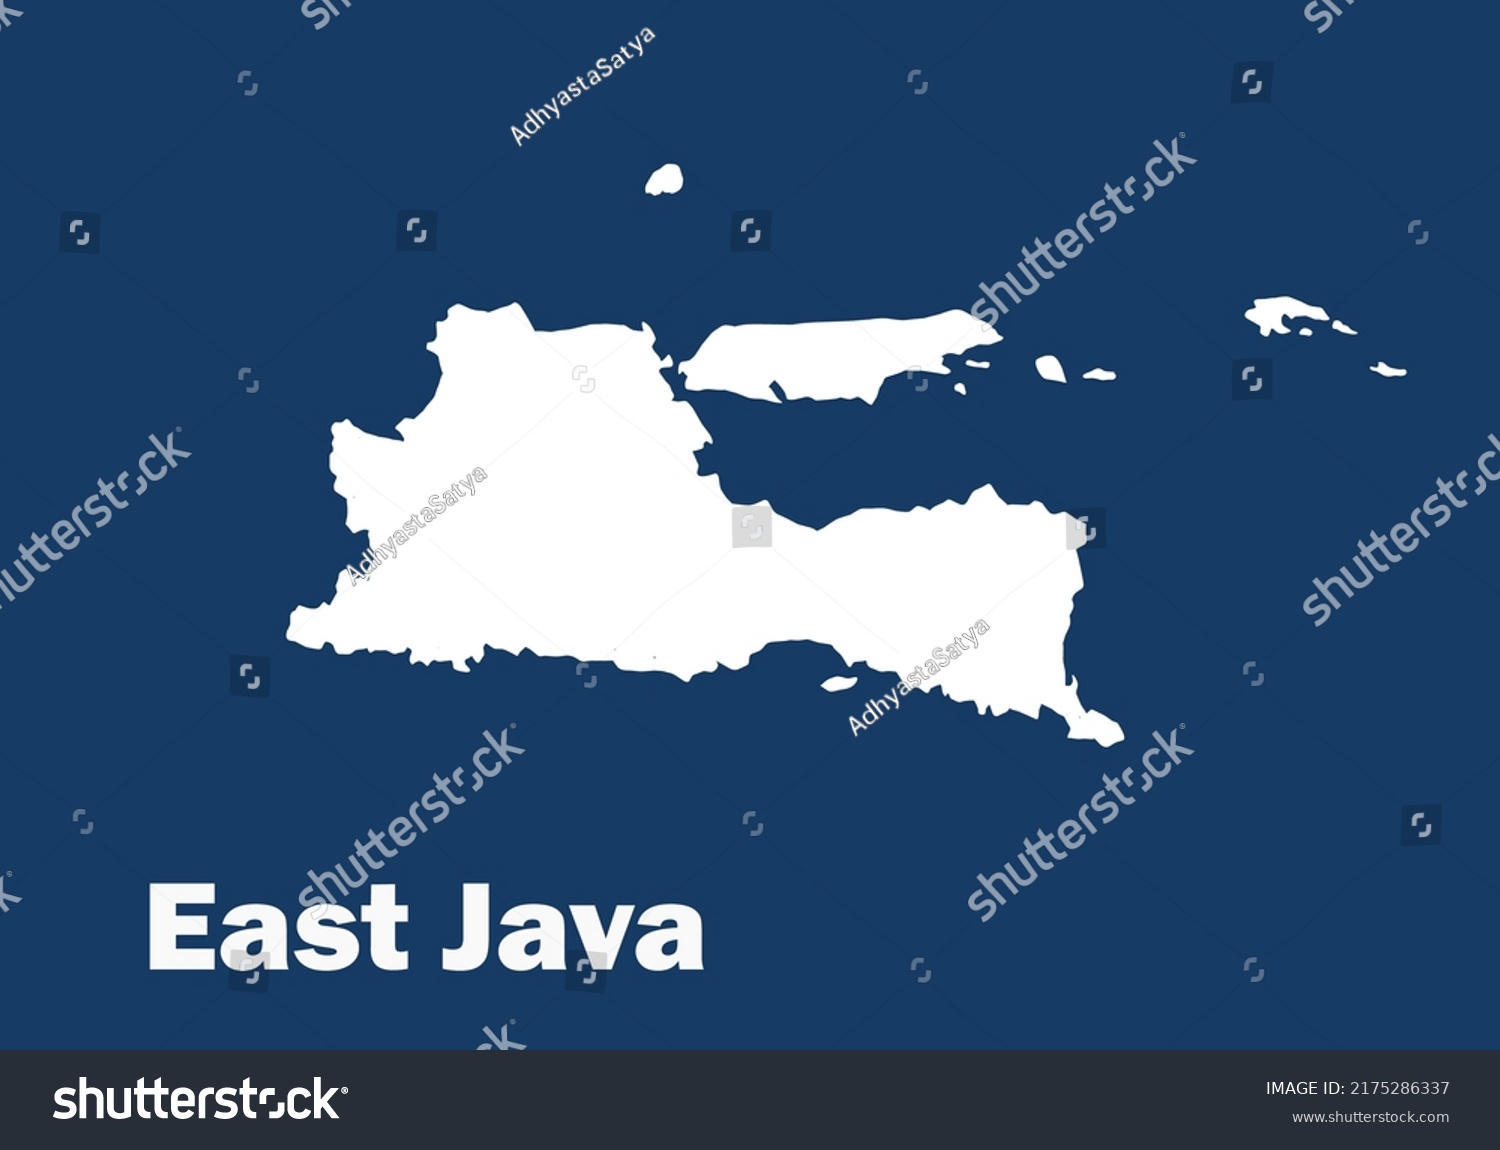 SVG of vector of East Java map in blue and white color svg